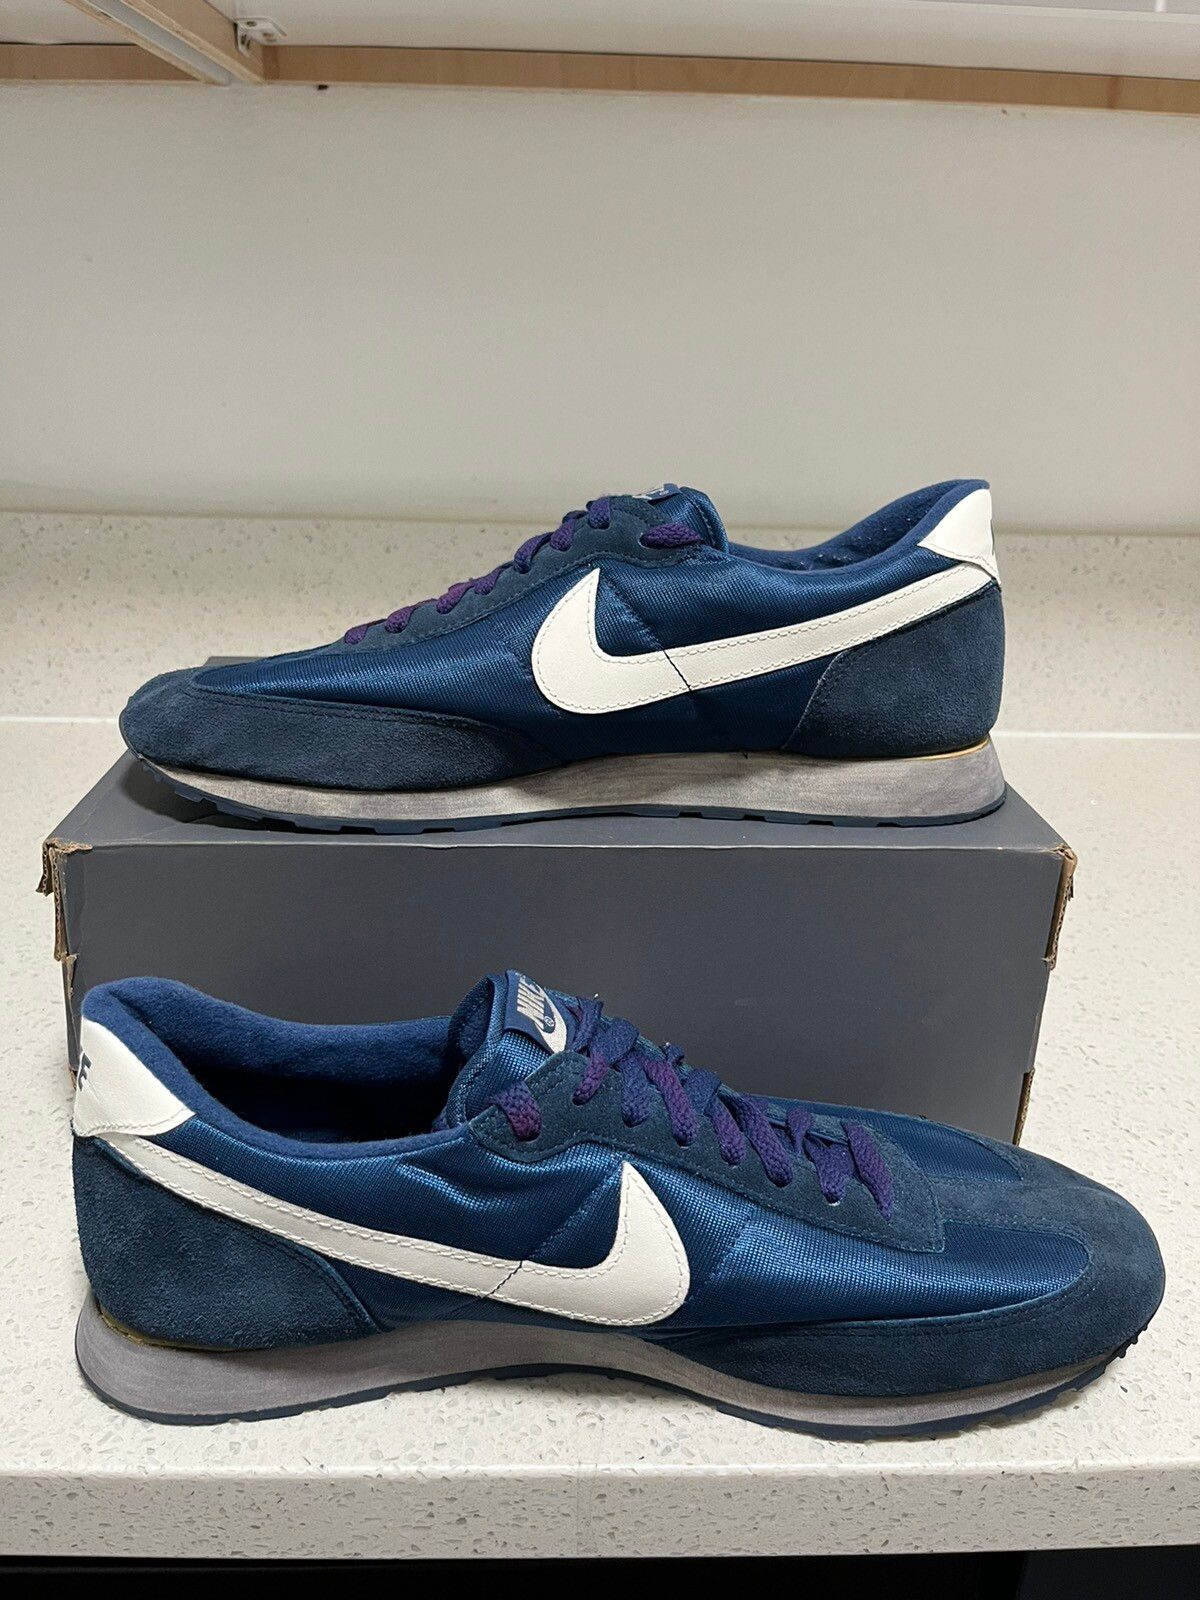 Nike Vintage 80s Nike Oceania 2 OG Running Shoes Sneakers Size 14 Size US 14 / EU 47 - 2 Preview